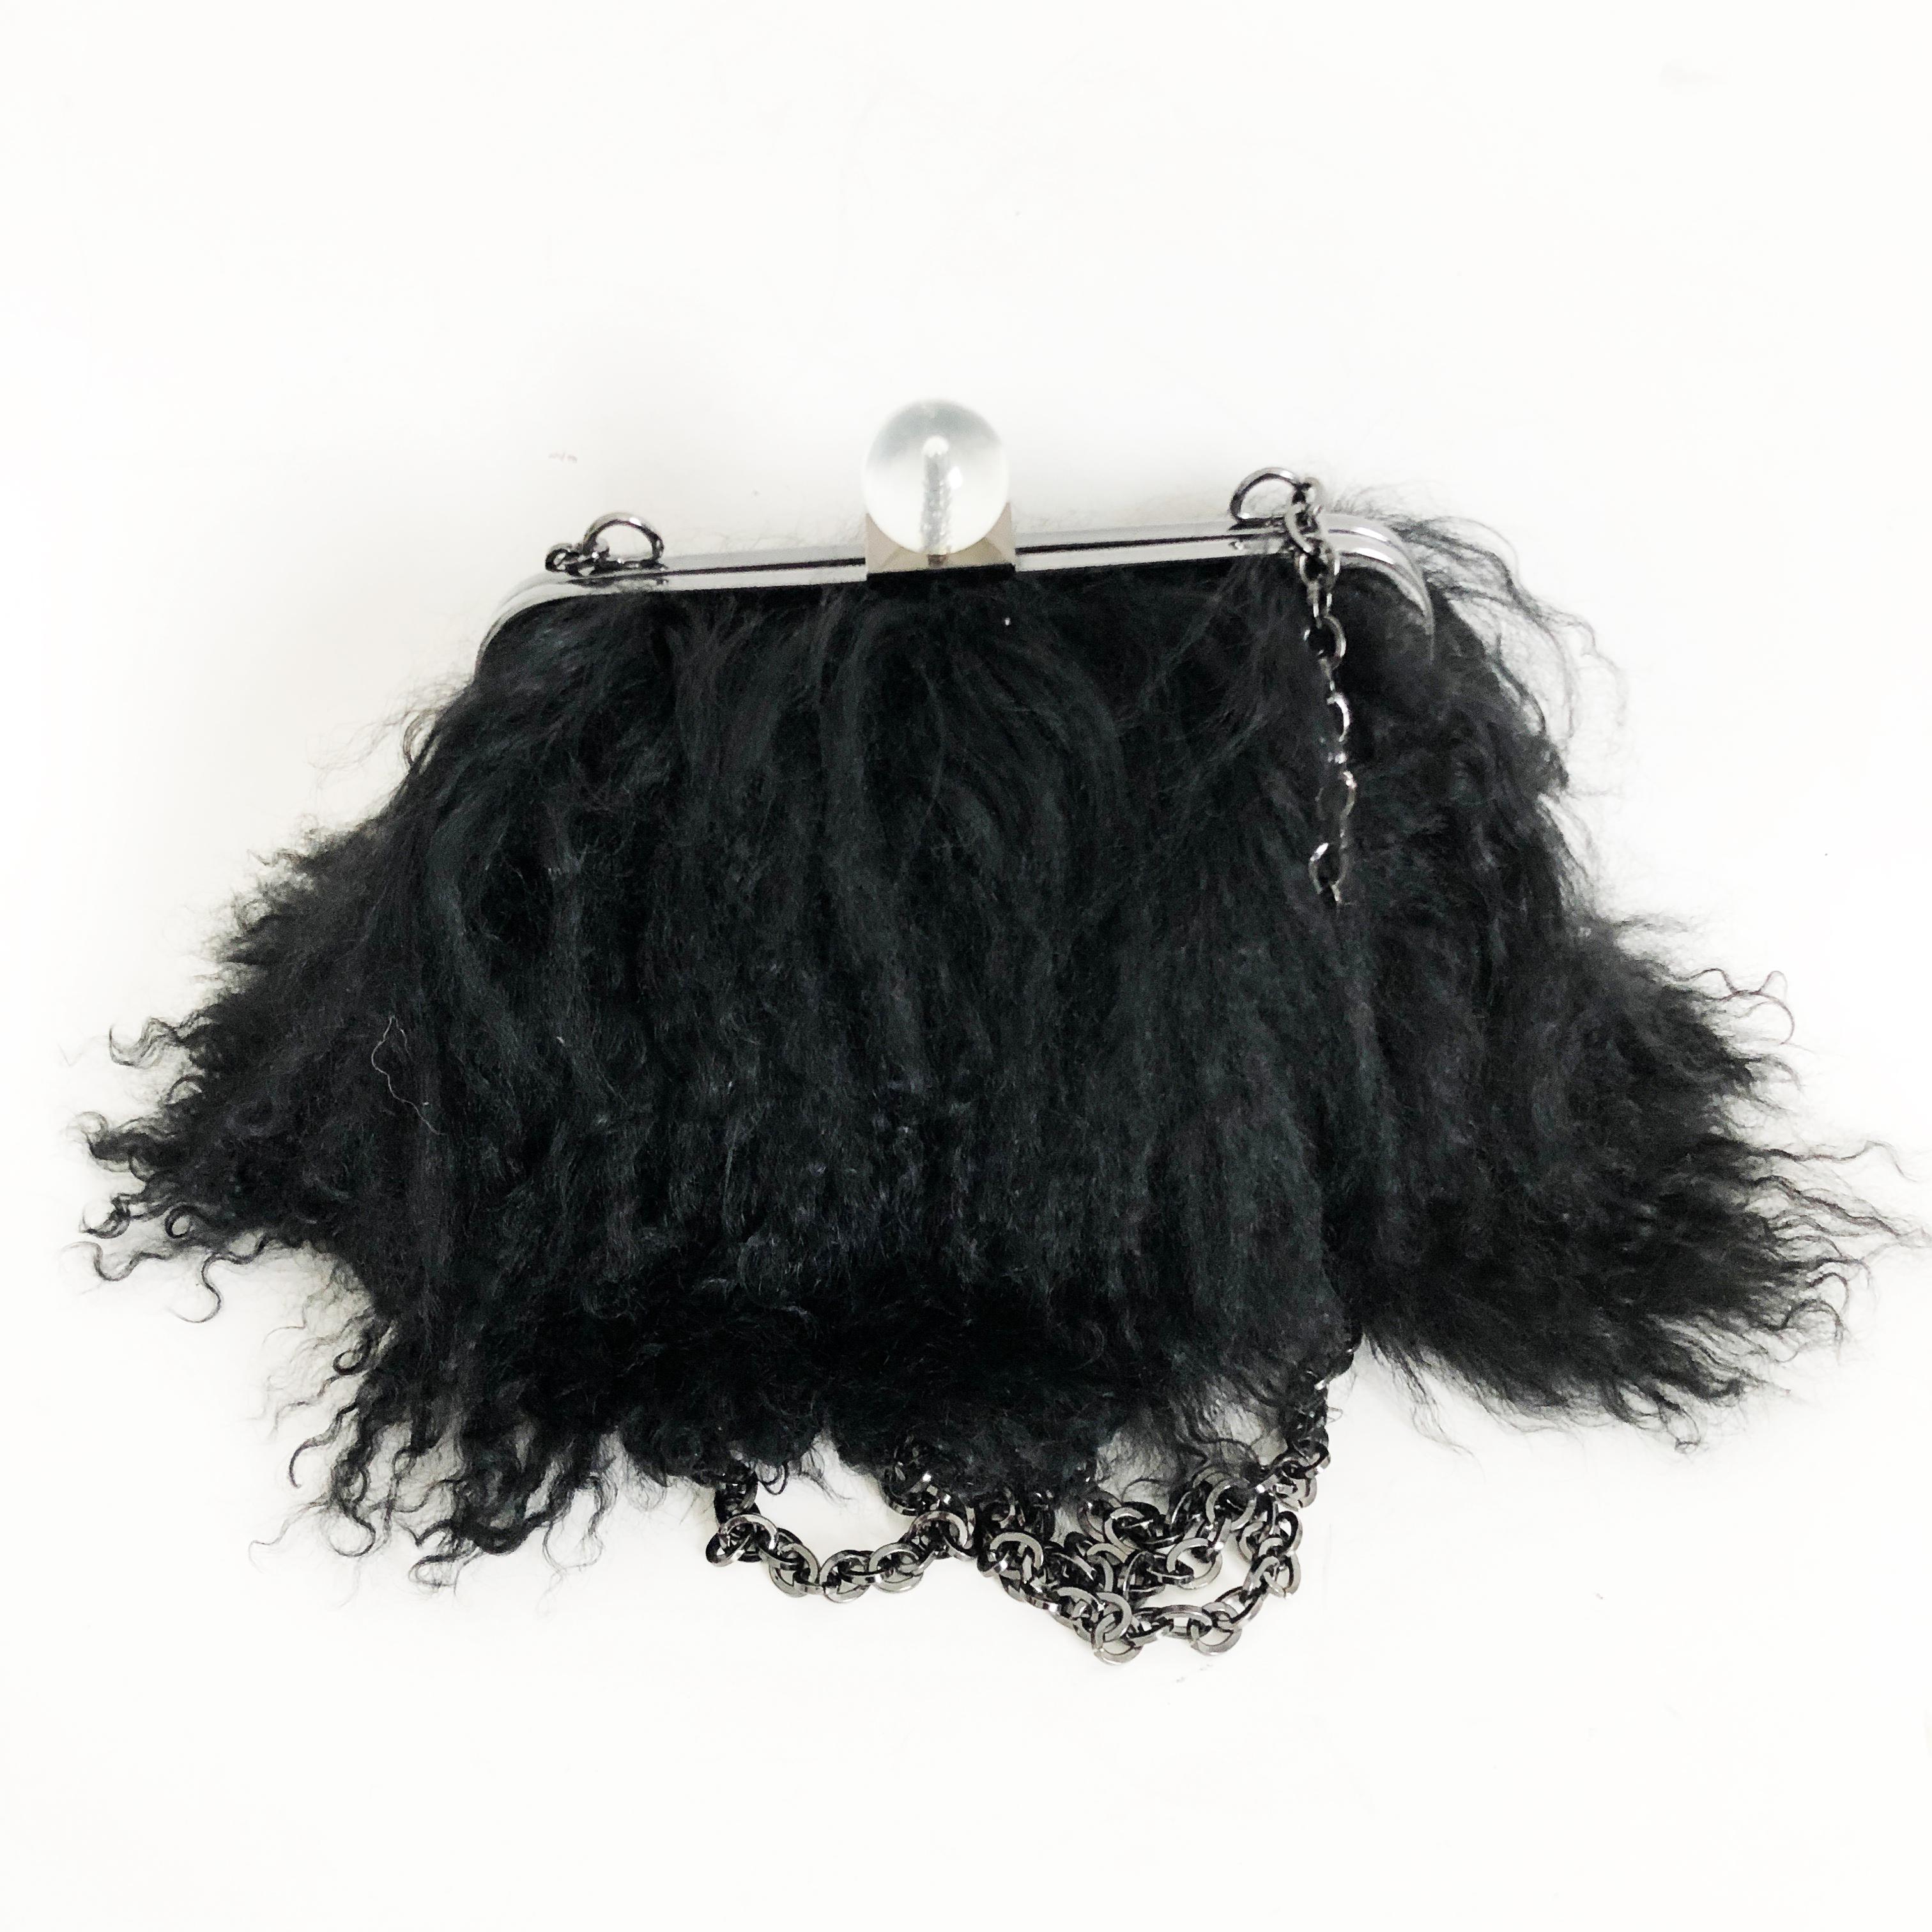 Iris Apfel Extinctions Black Mongolian Lamb Fur Bag. Features a chain strap for shoulder wear or can be stowed in the bag for use as a clutch. Lined in blue grosgrain fabric. Fastens with clear bubble clasp. Preowned with minimal signs of prior